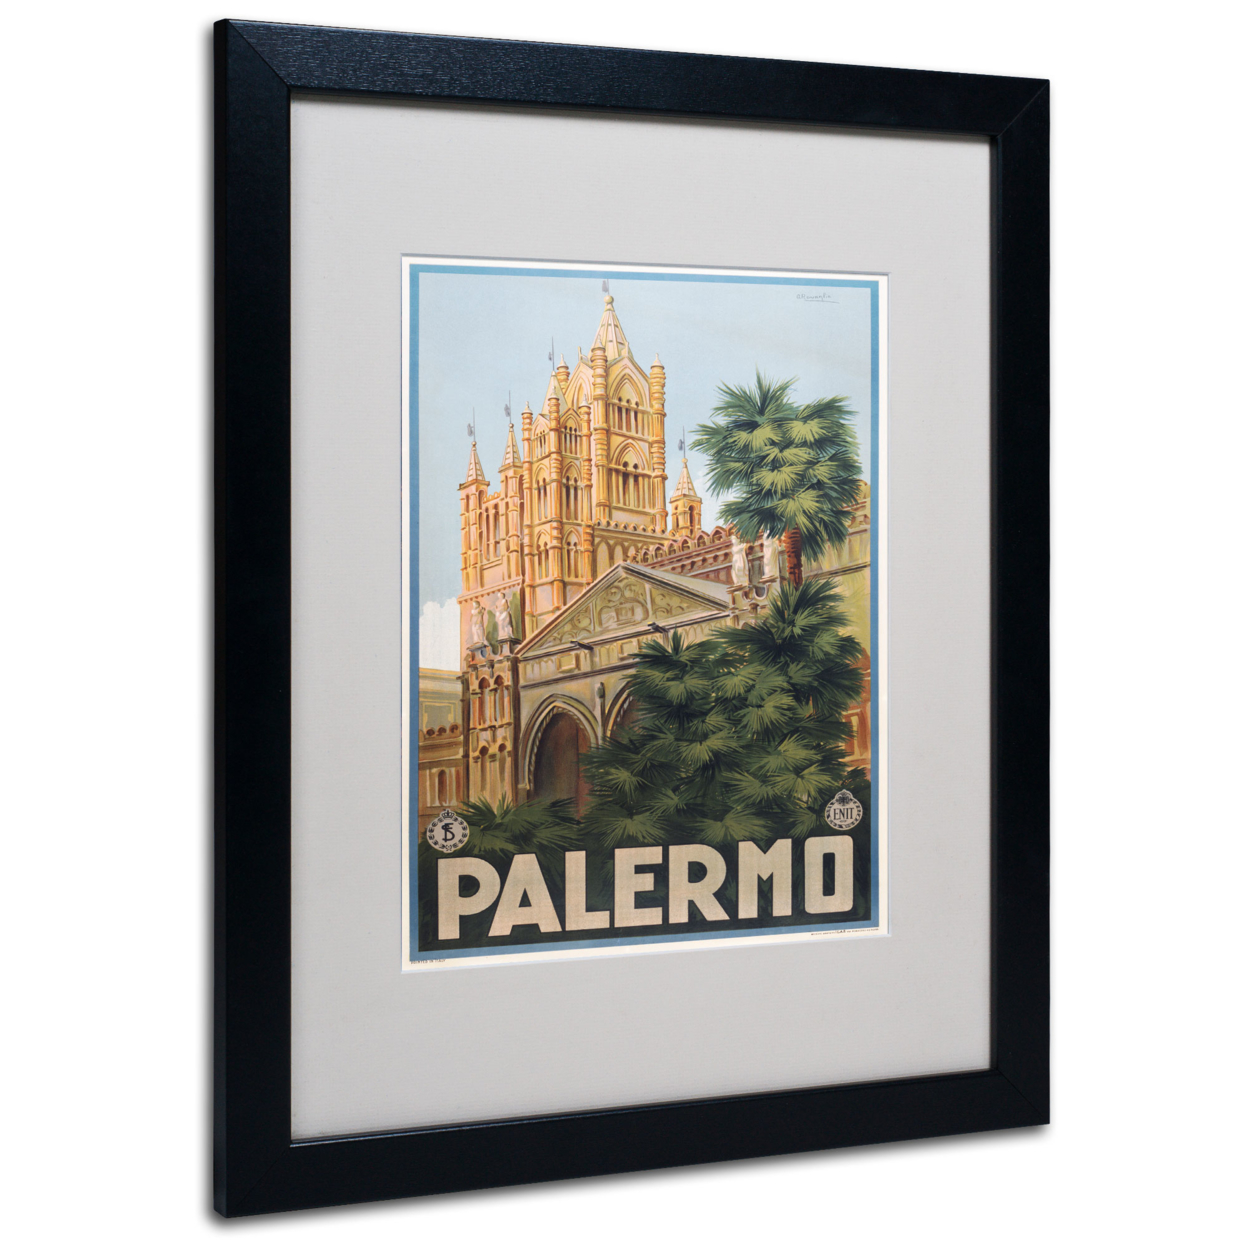 Palermo' Black Wooden Framed Art 18 X 22 Inches